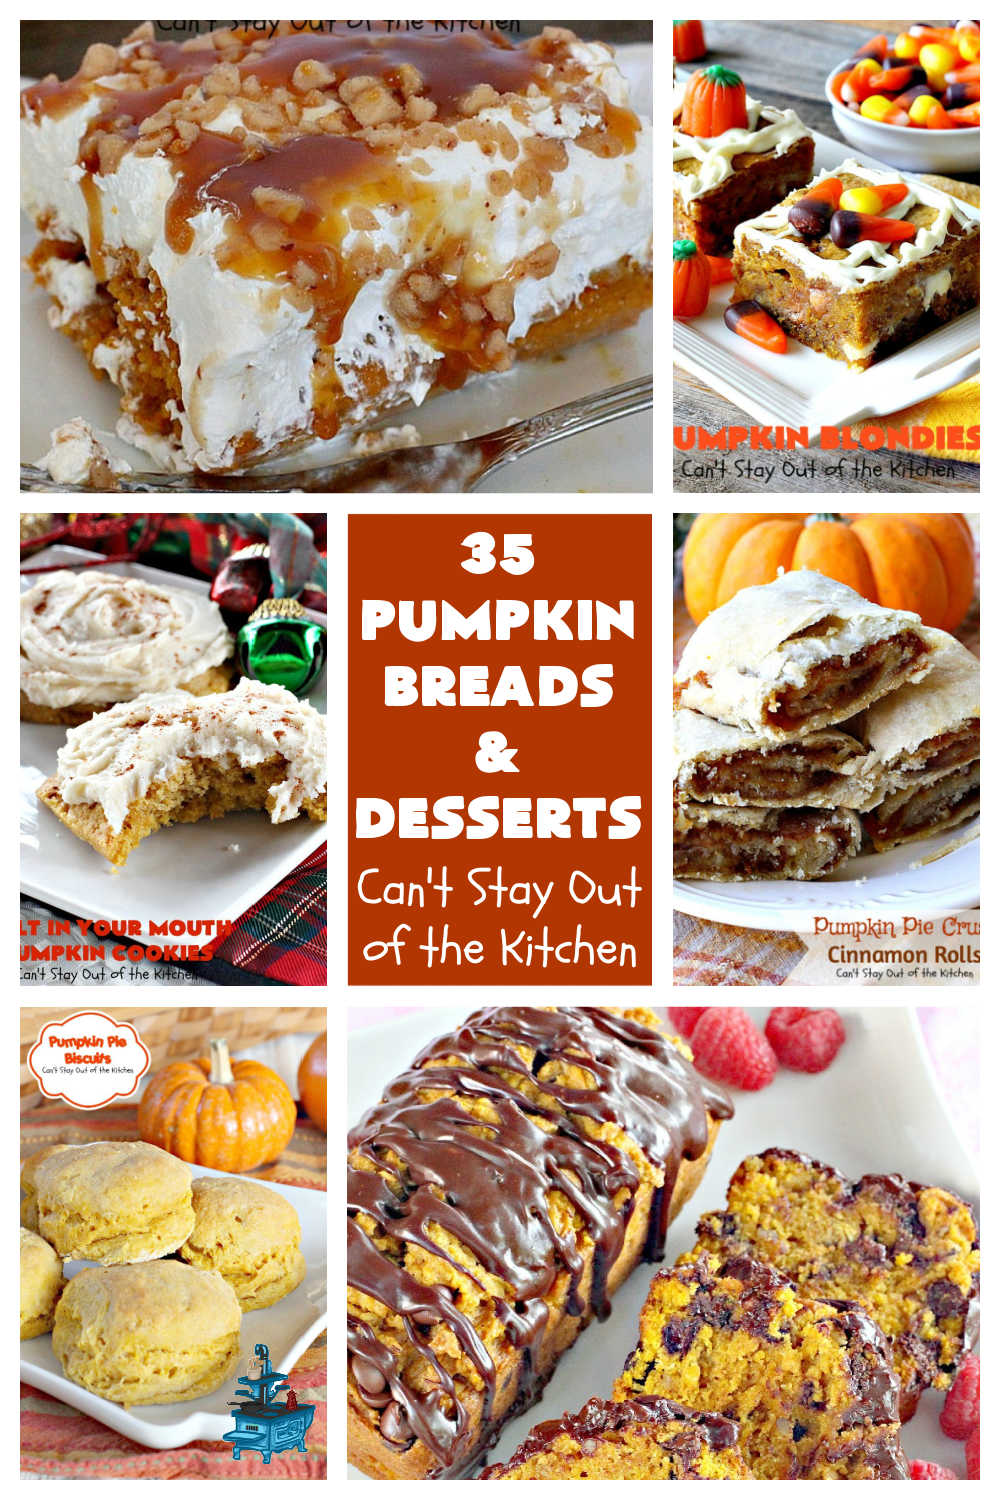 35 Pumpkin Breads & Desserts | Can't Stay Out of the Kitchen | Enjoy #holiday #baking with these fun & delicious #recipes including #breads, #muffins, #Croissants, #donuts, #cakes, #cookies, #blondies #pie, #biscuits & #PumpkinDesserts. #PumpkinBreadsAndDesserts #35PumpkinRecipes #PumpkinRecipes